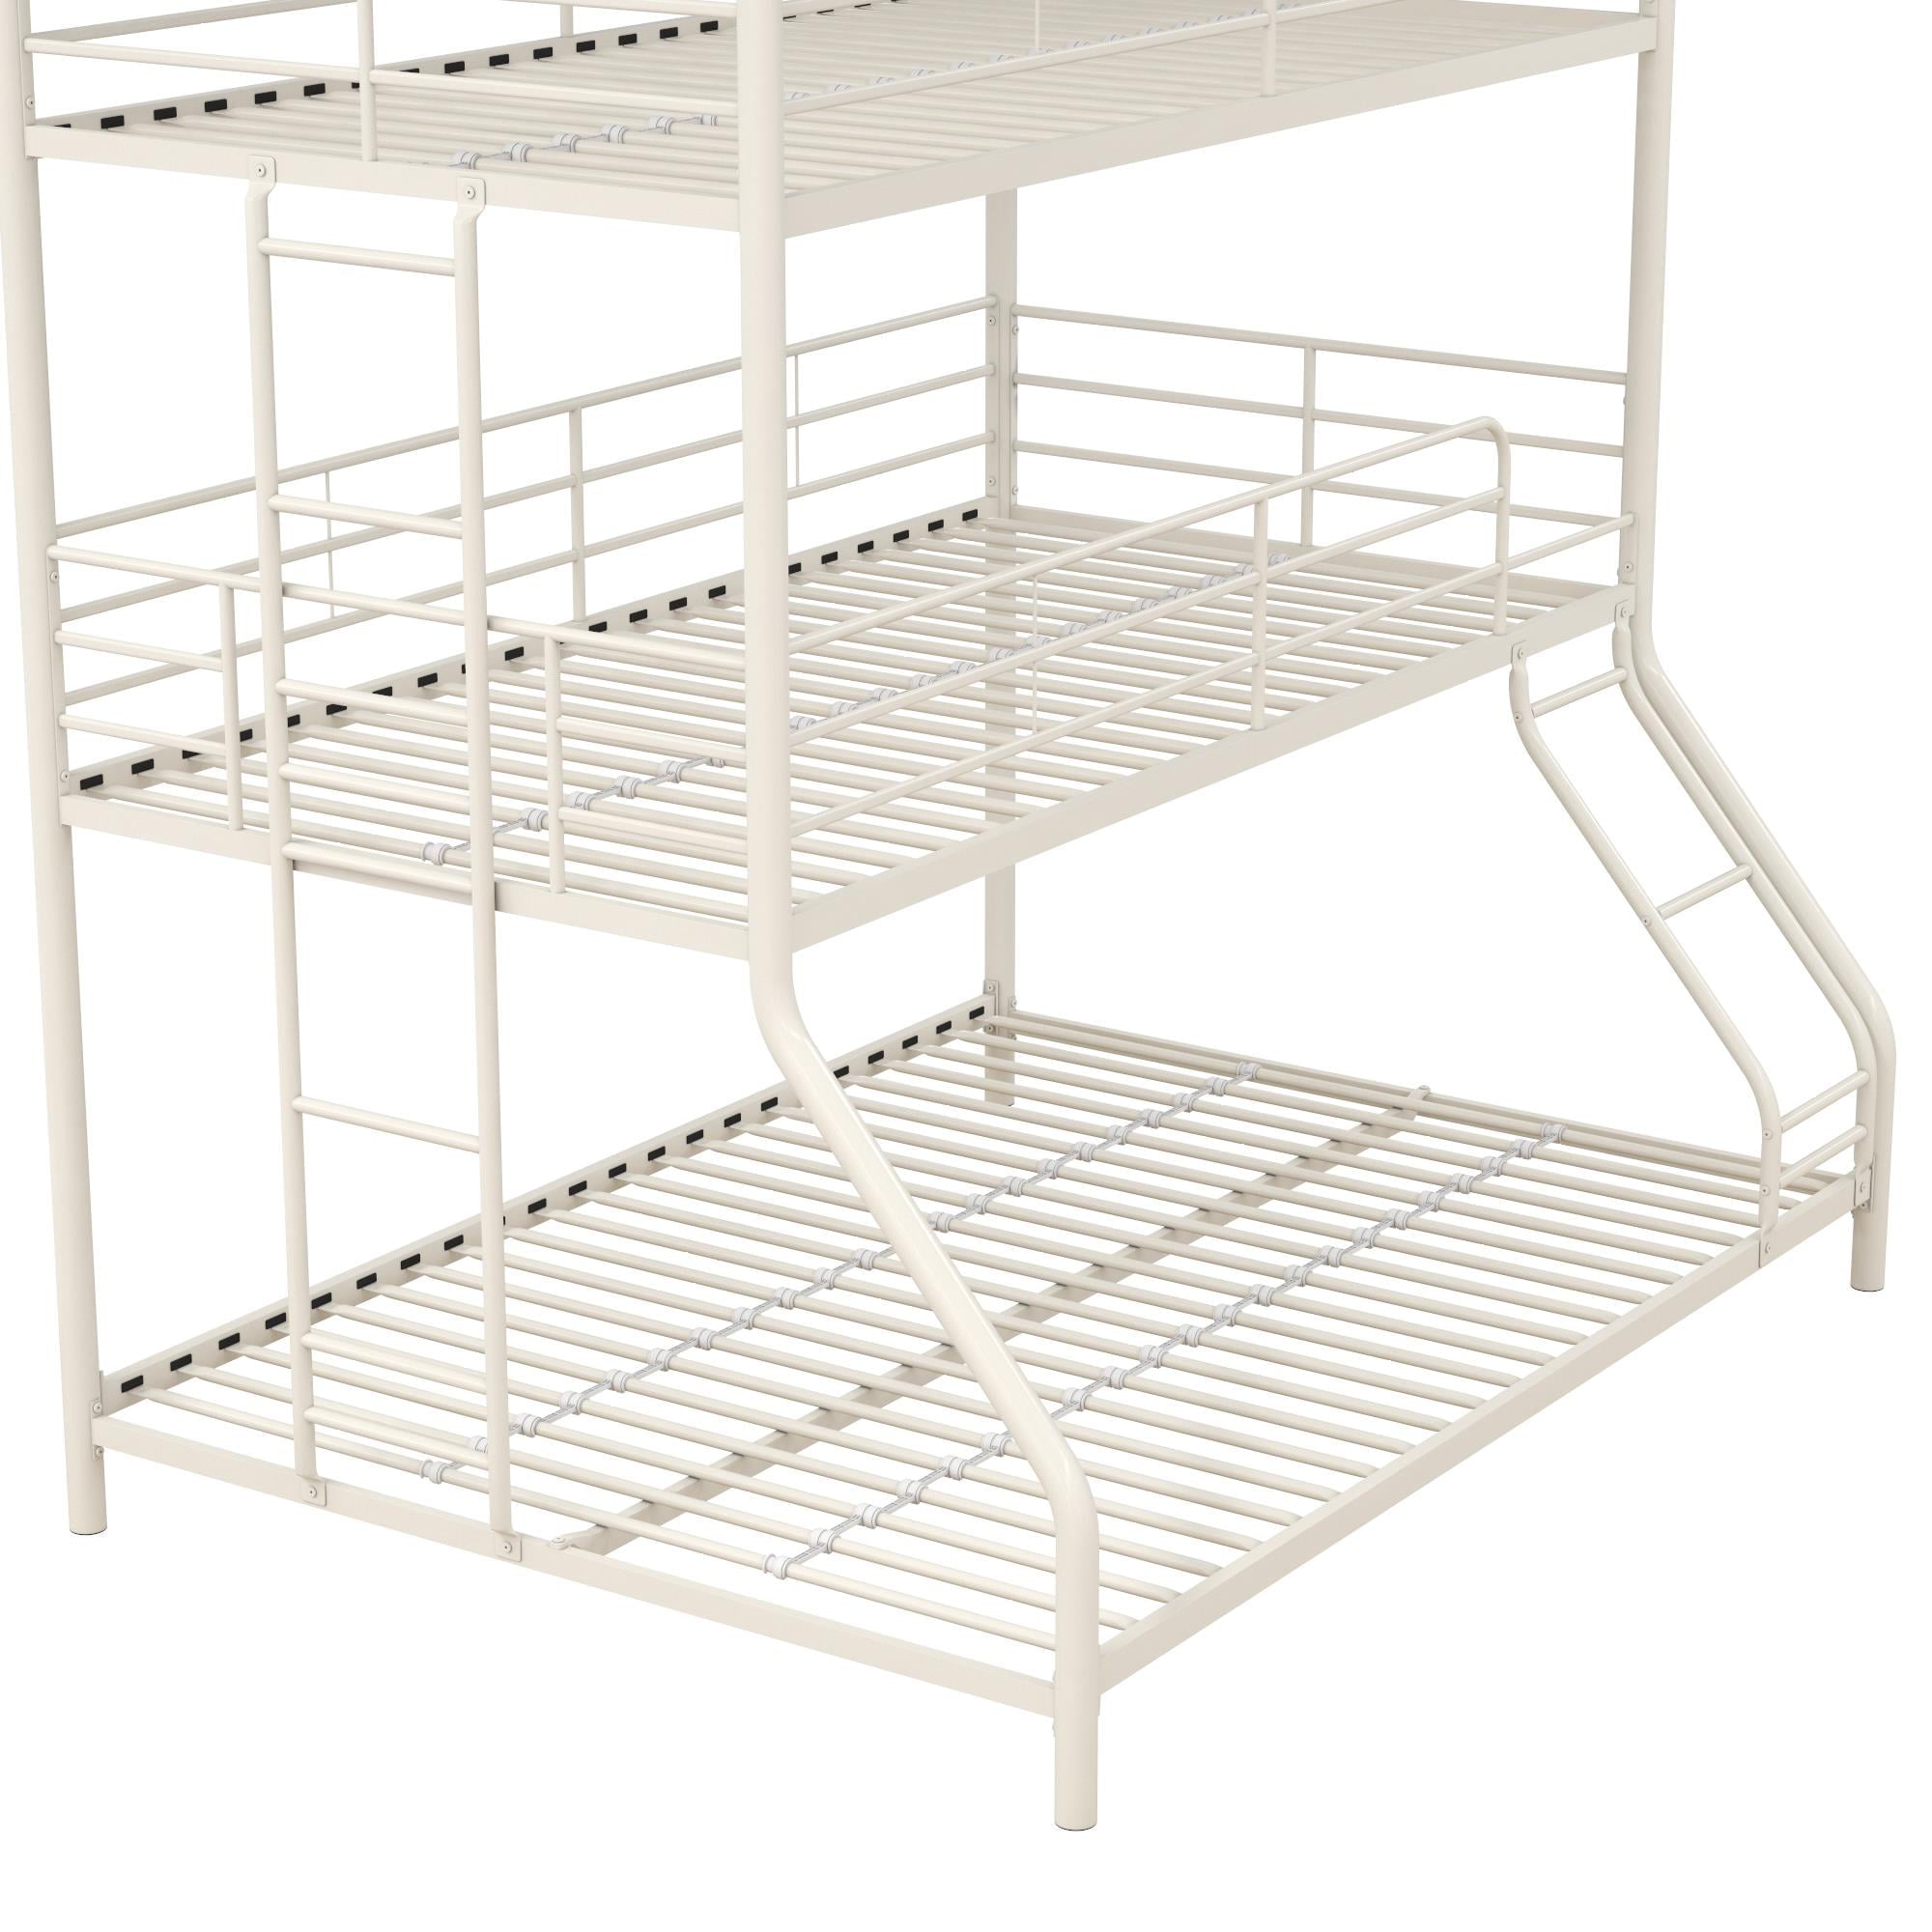 DHP Everleigh Triple Metal Bunk Bed, Twin/Twin/Full, Bed for Kids, Off White